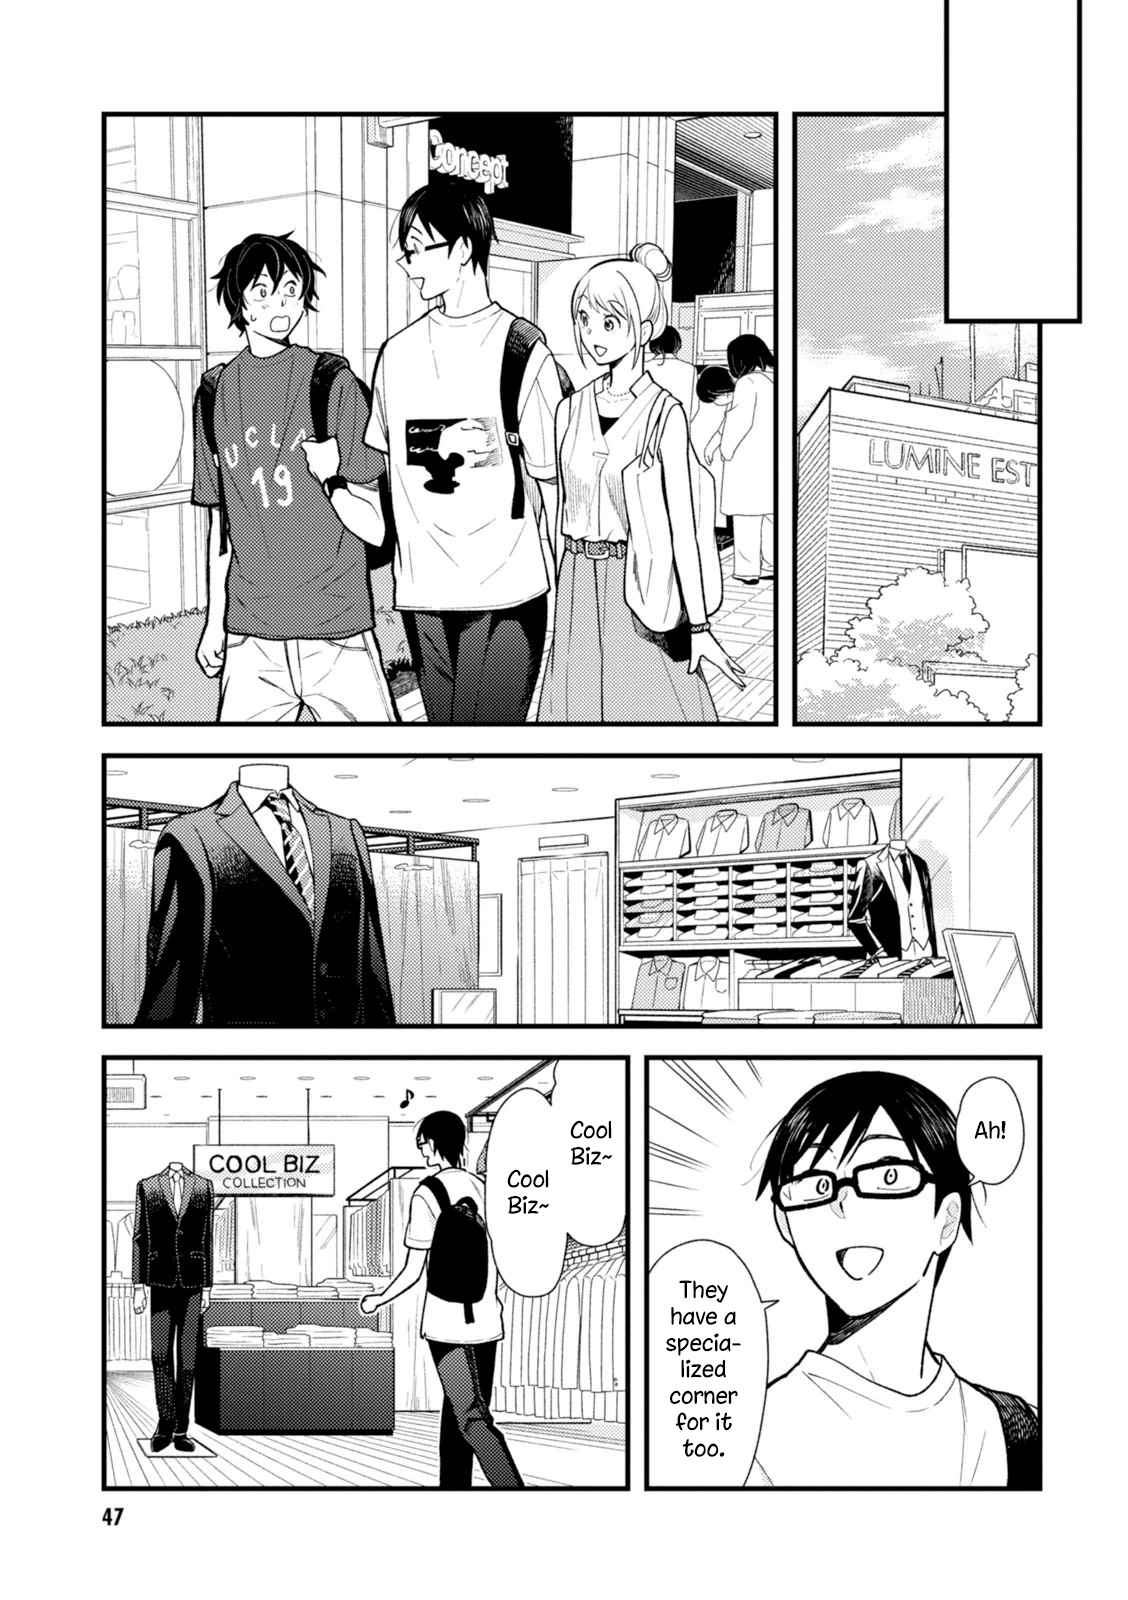 If You're Gonna Dress Up, Do It Like This Vol. 4 Ch. 27